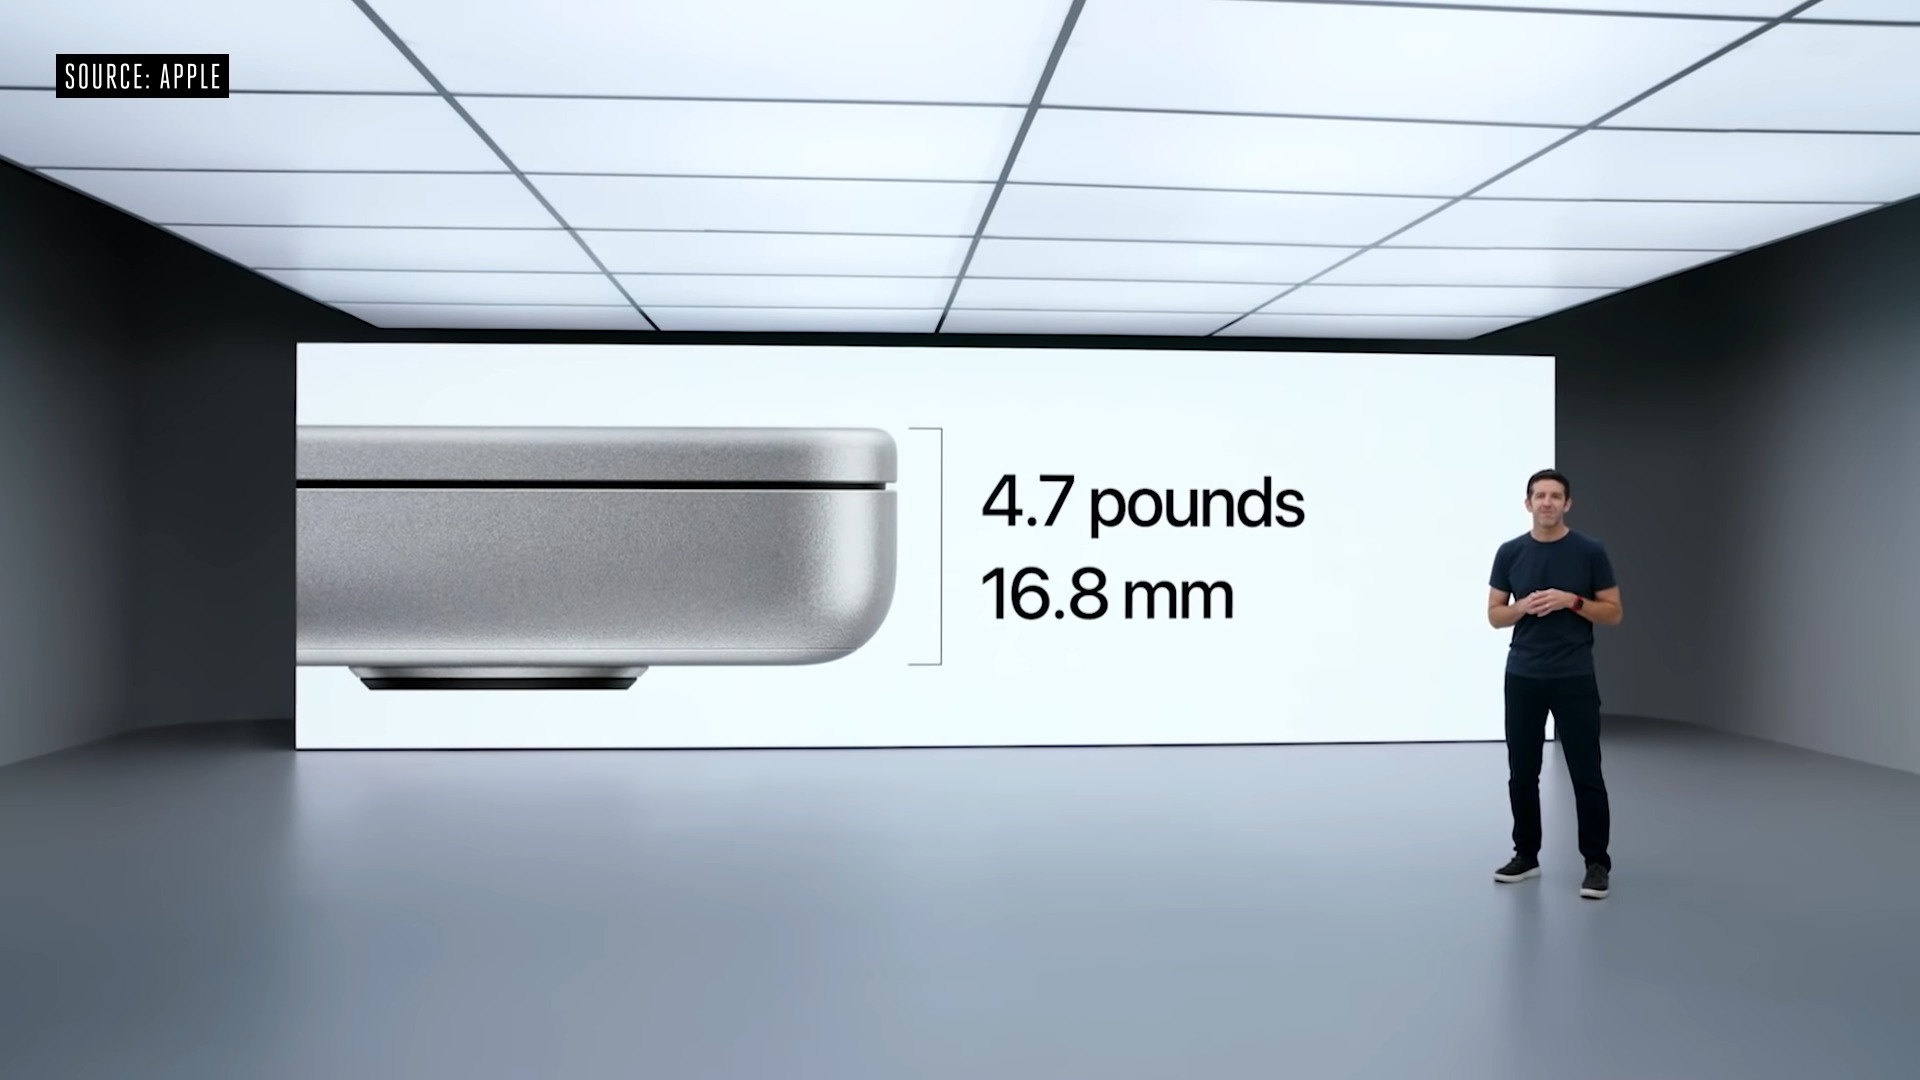 Explaining the thickness and weight of the Apple MacBook.